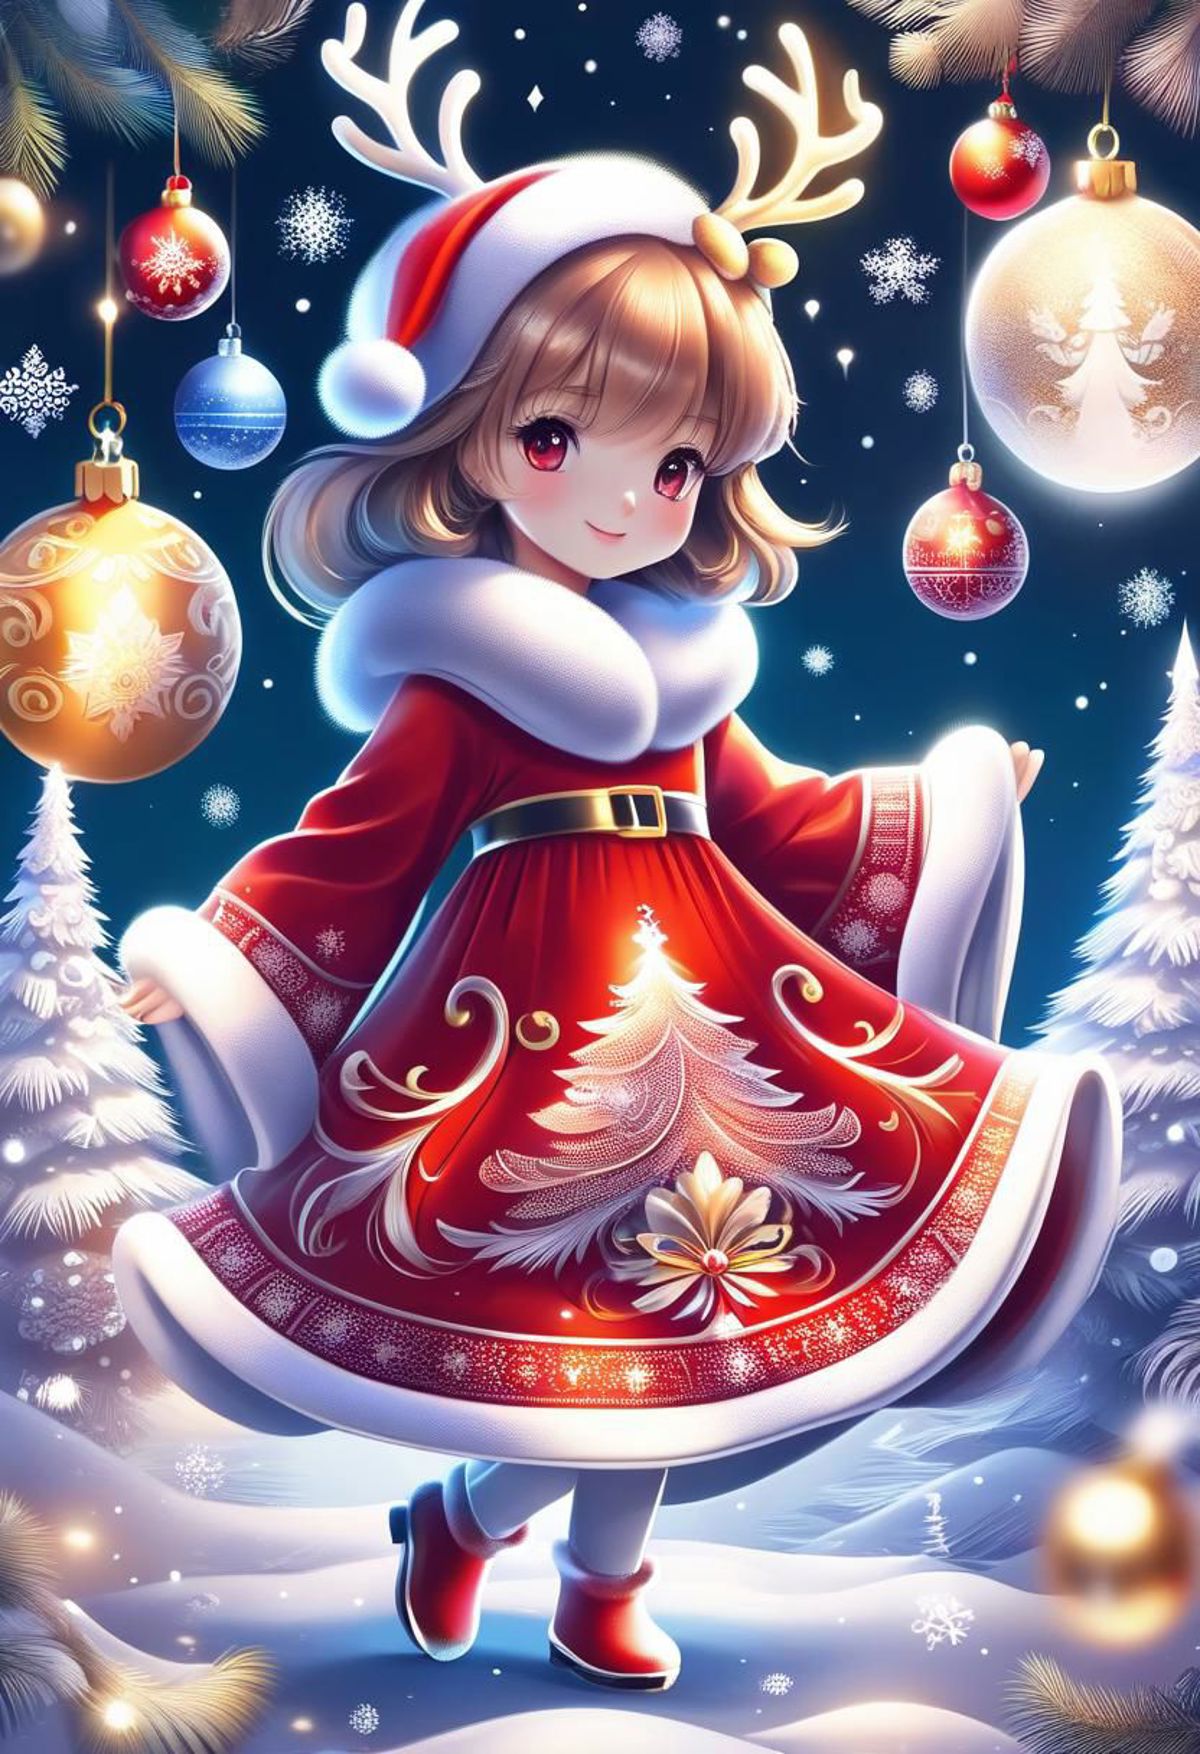 Wintery Christmas Scene with a Snowflake Dressed Girl.